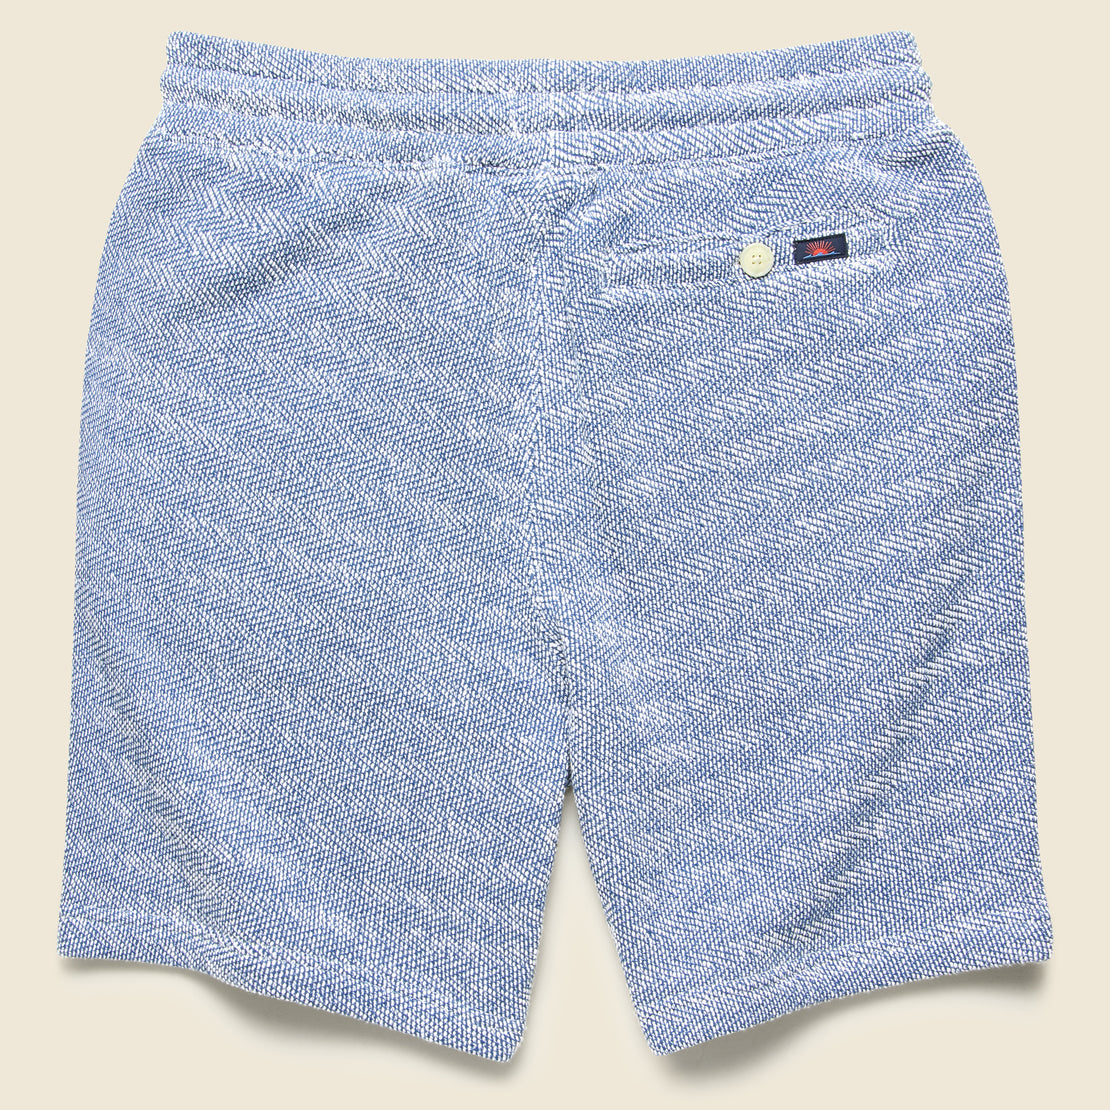 Whitewater Sweatshort - Whitewater - Faherty - STAG Provisions - Shorts - Lounge